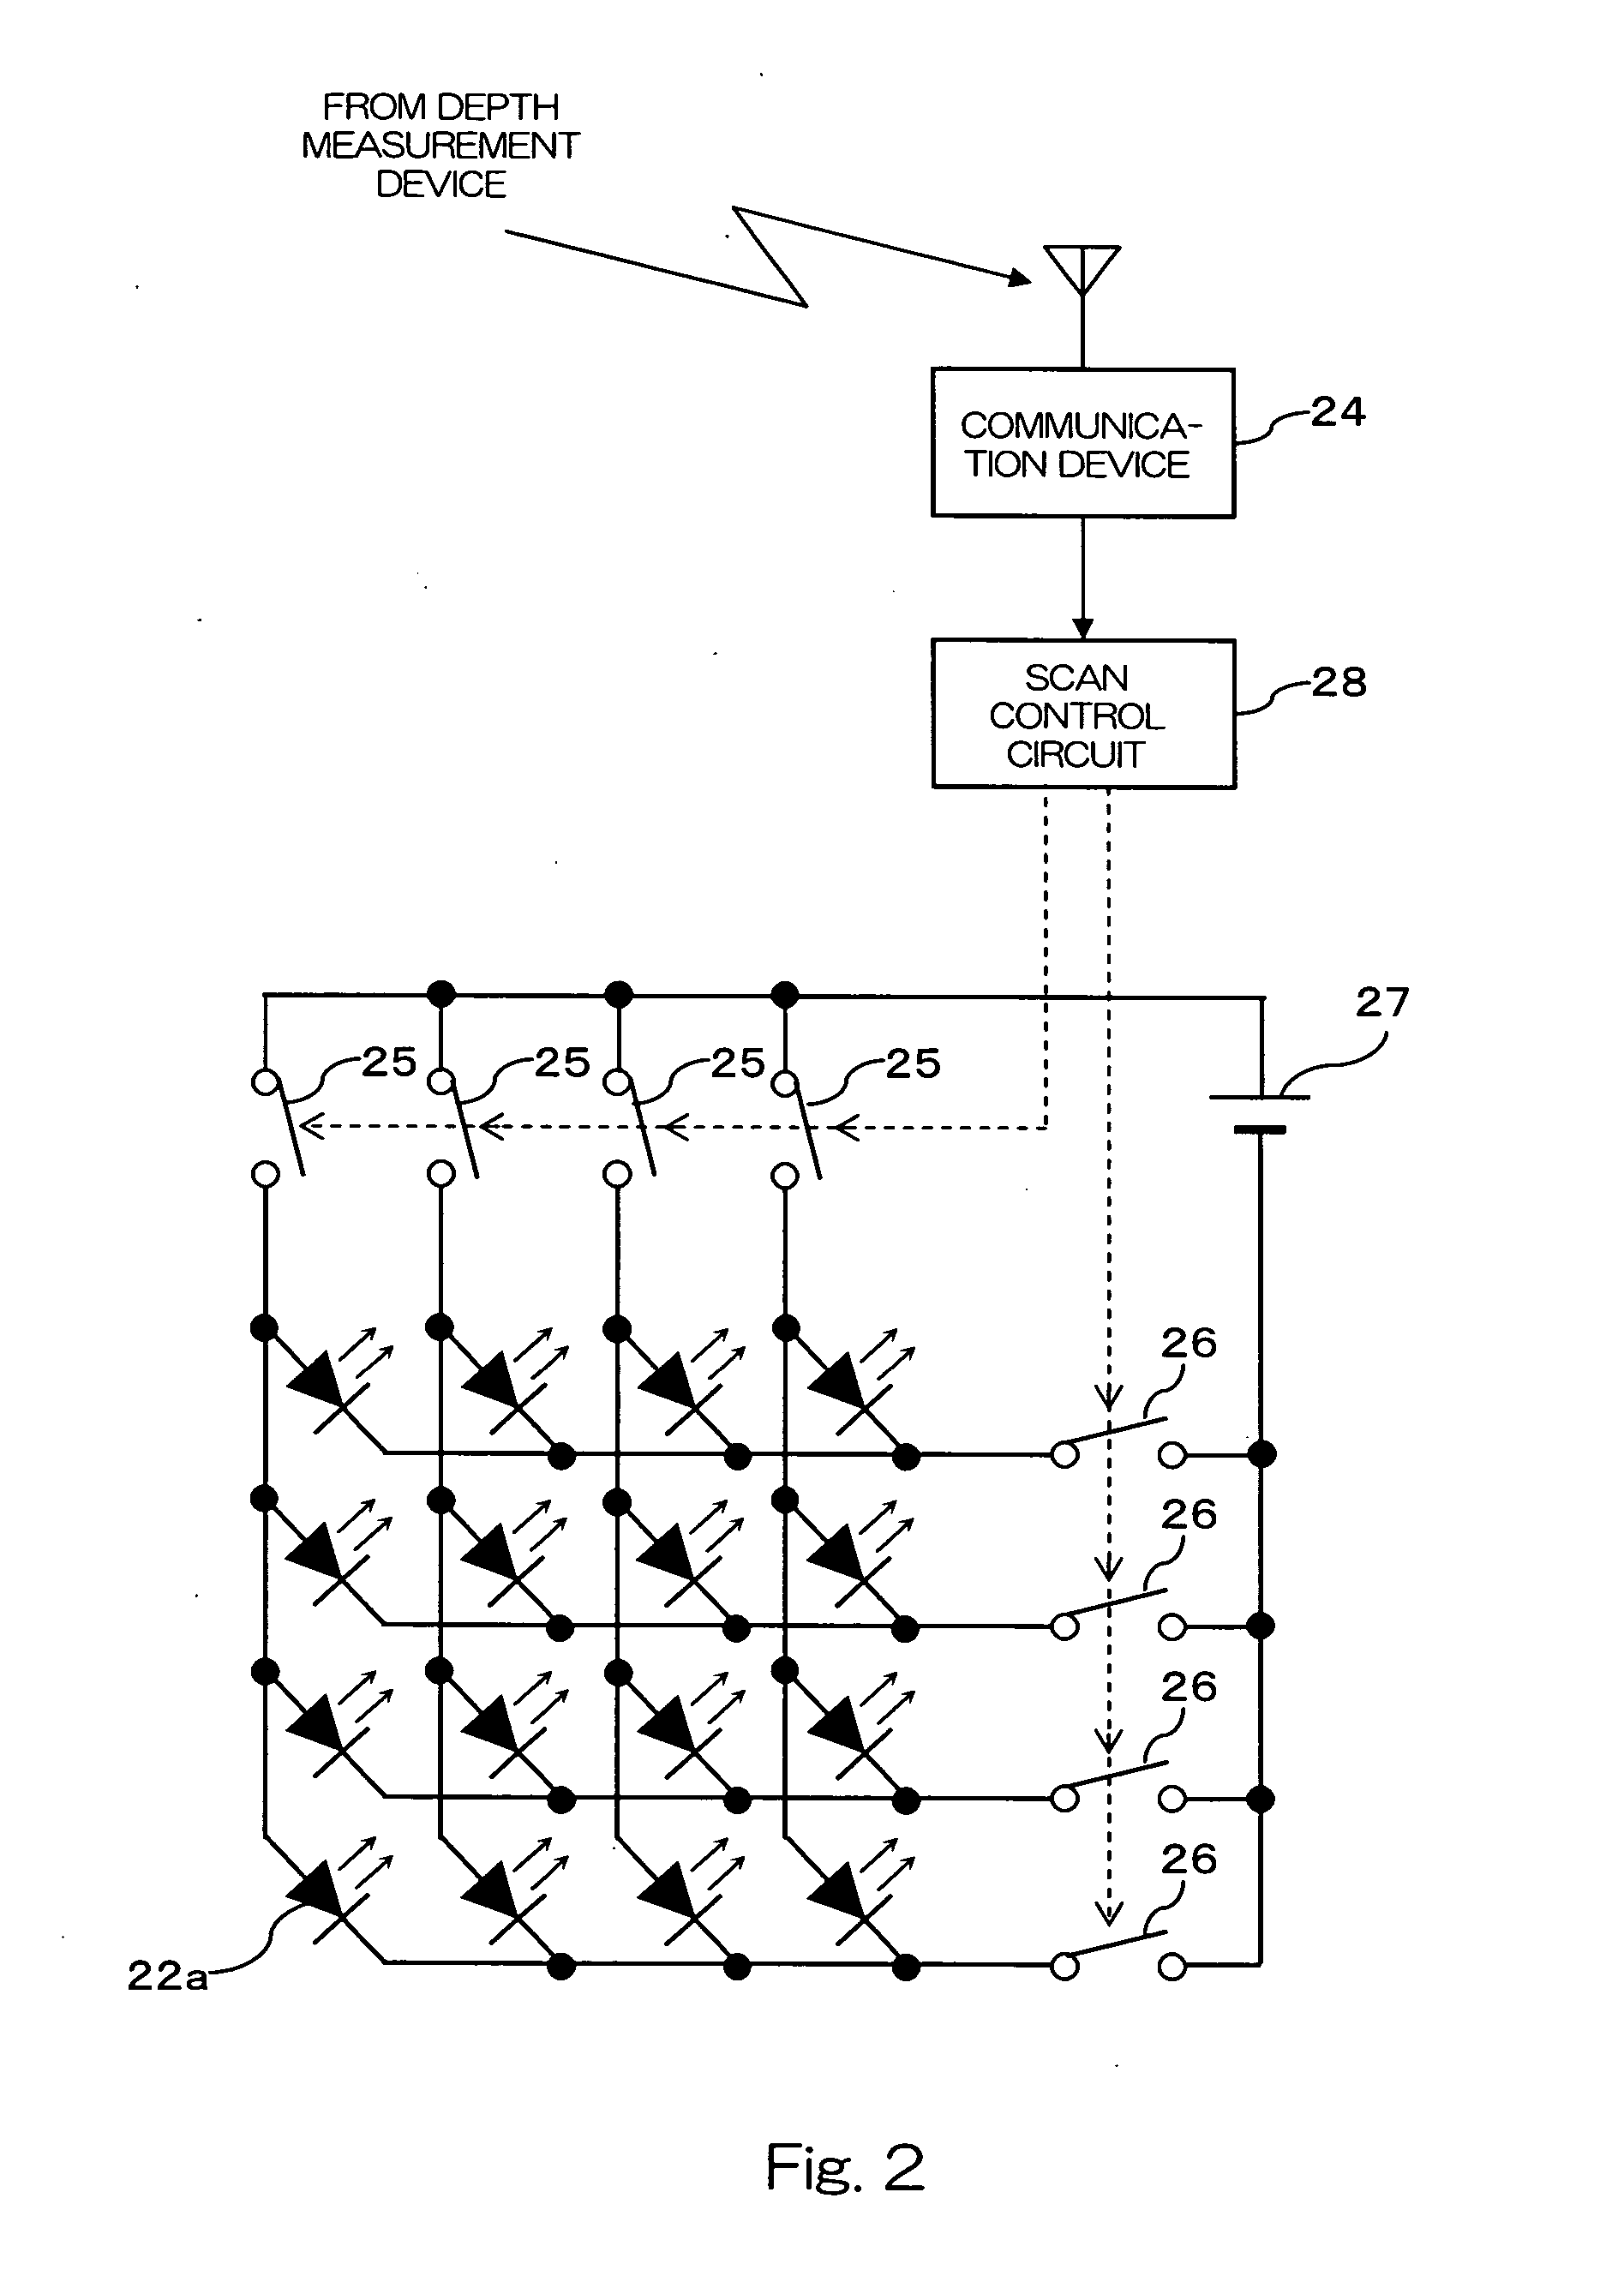 Camera Calibration System and Three-Dimensional Measuring System